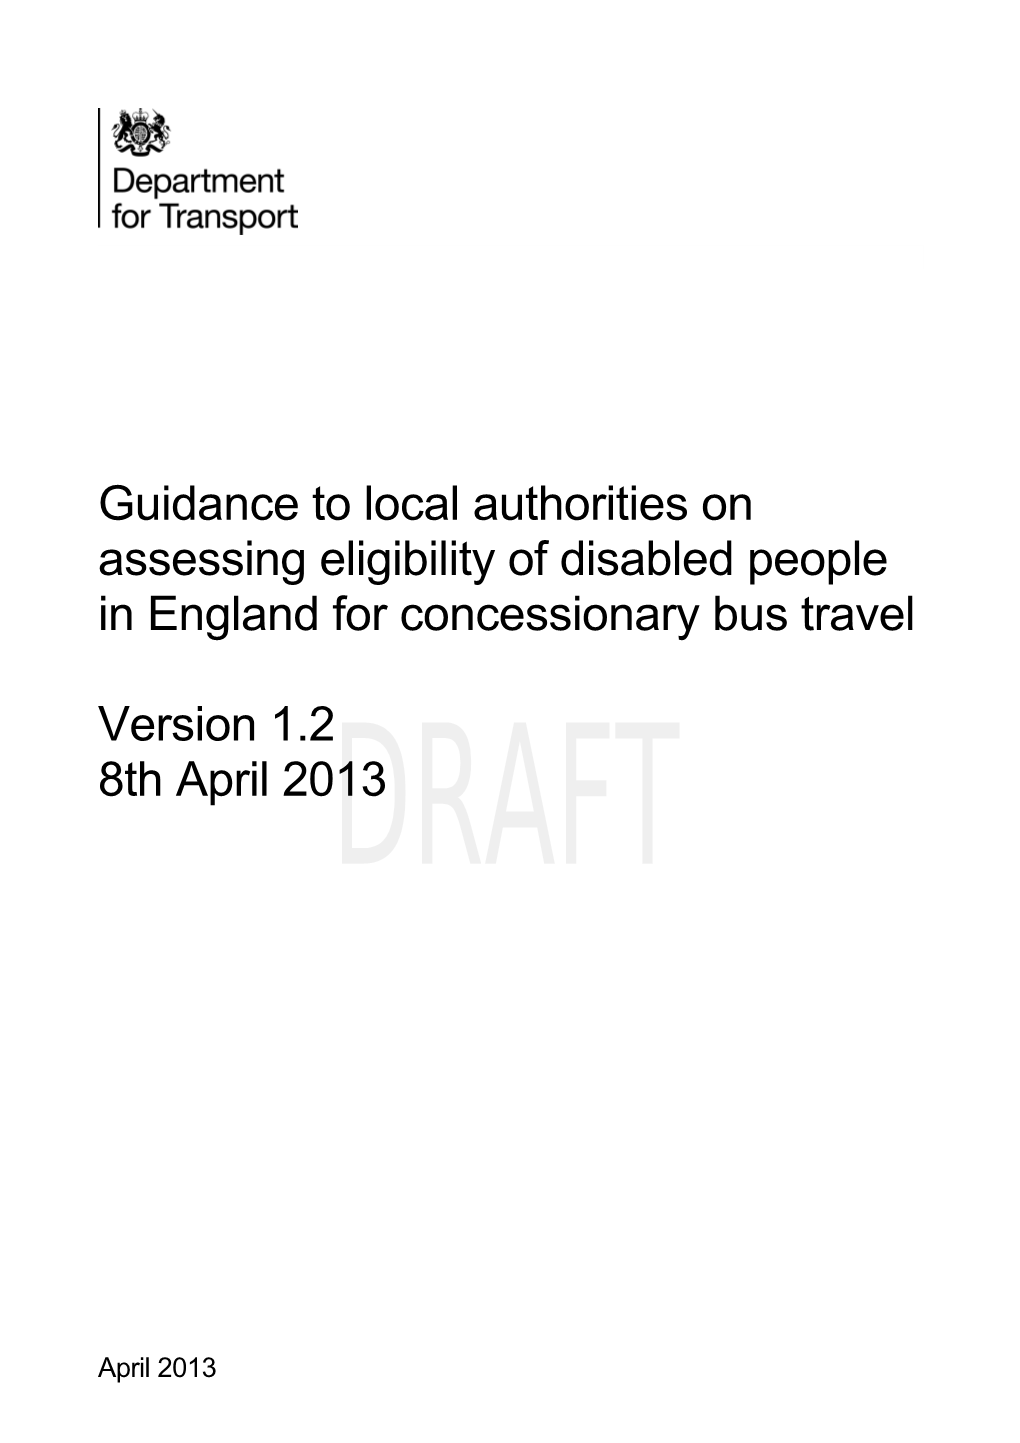 Guidance to Local Authorities on Assessing Eligibility of Disabled People in England For